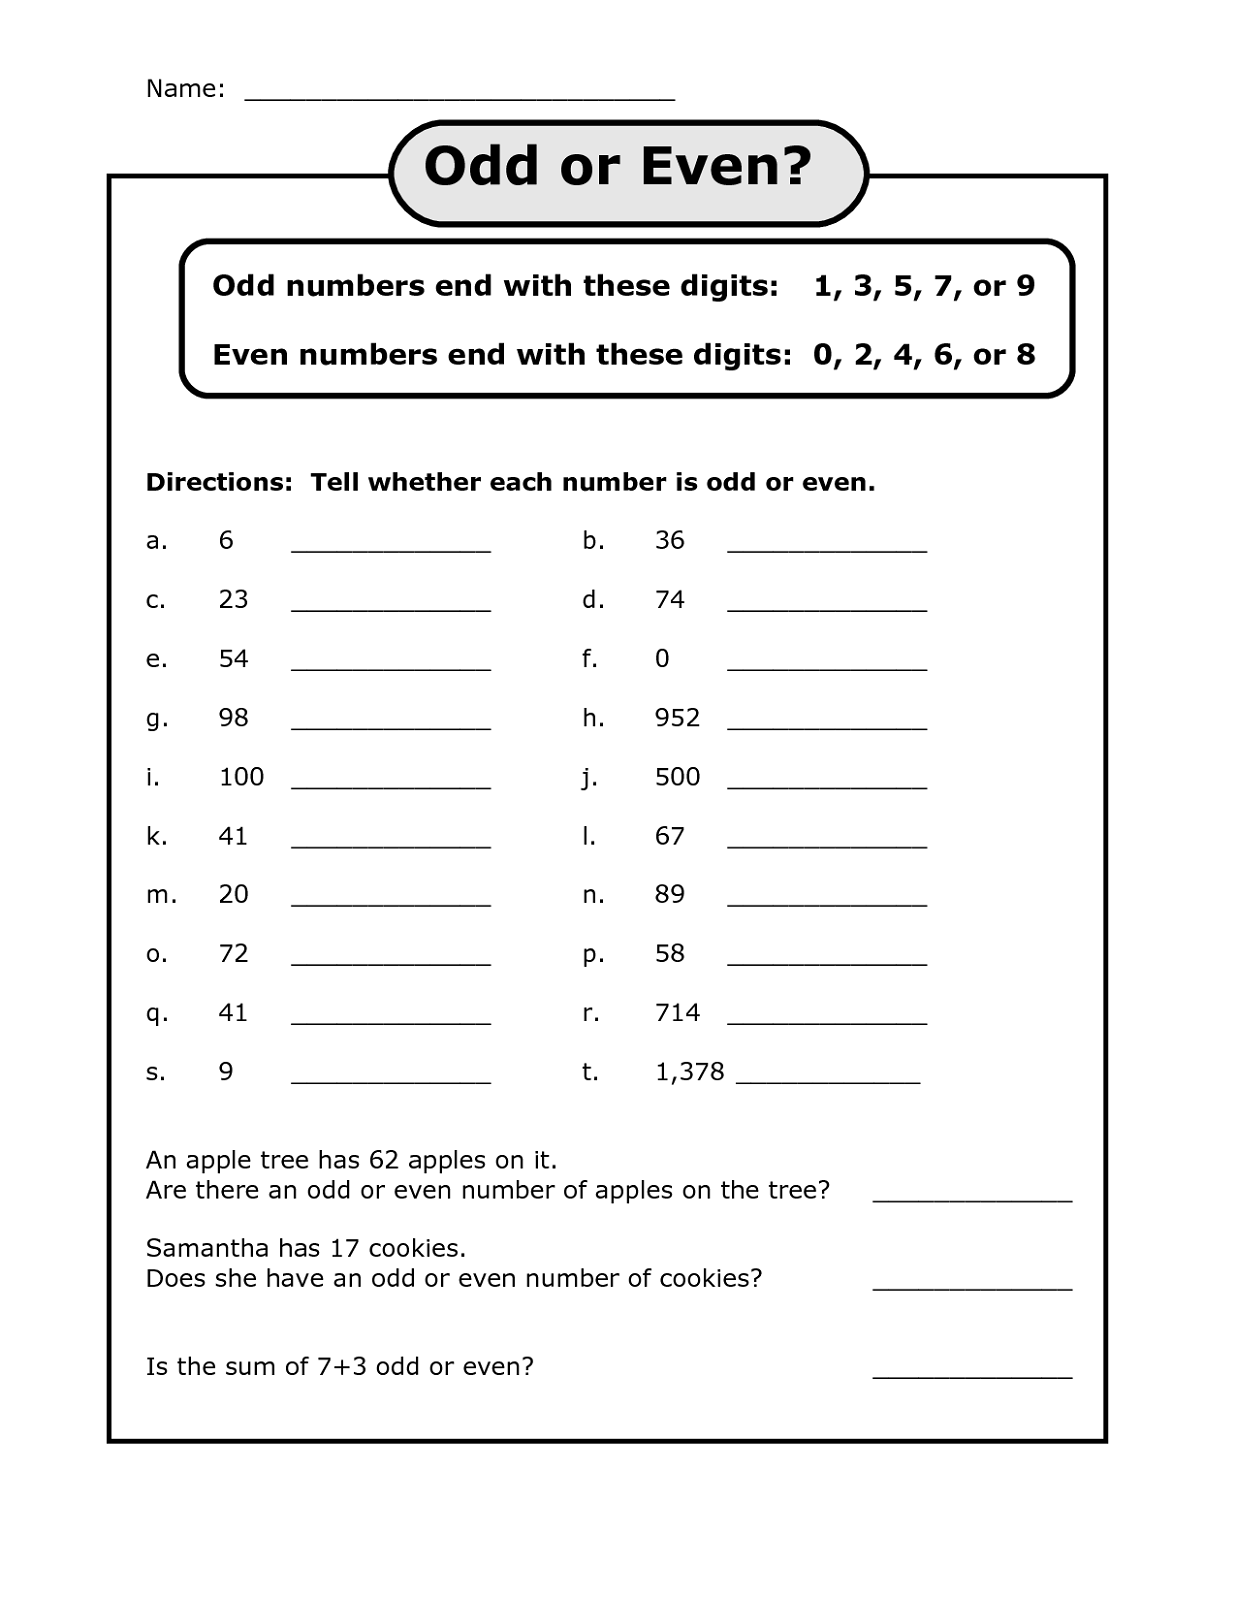 odd-and-even-worksheets-printable-activity-shelter